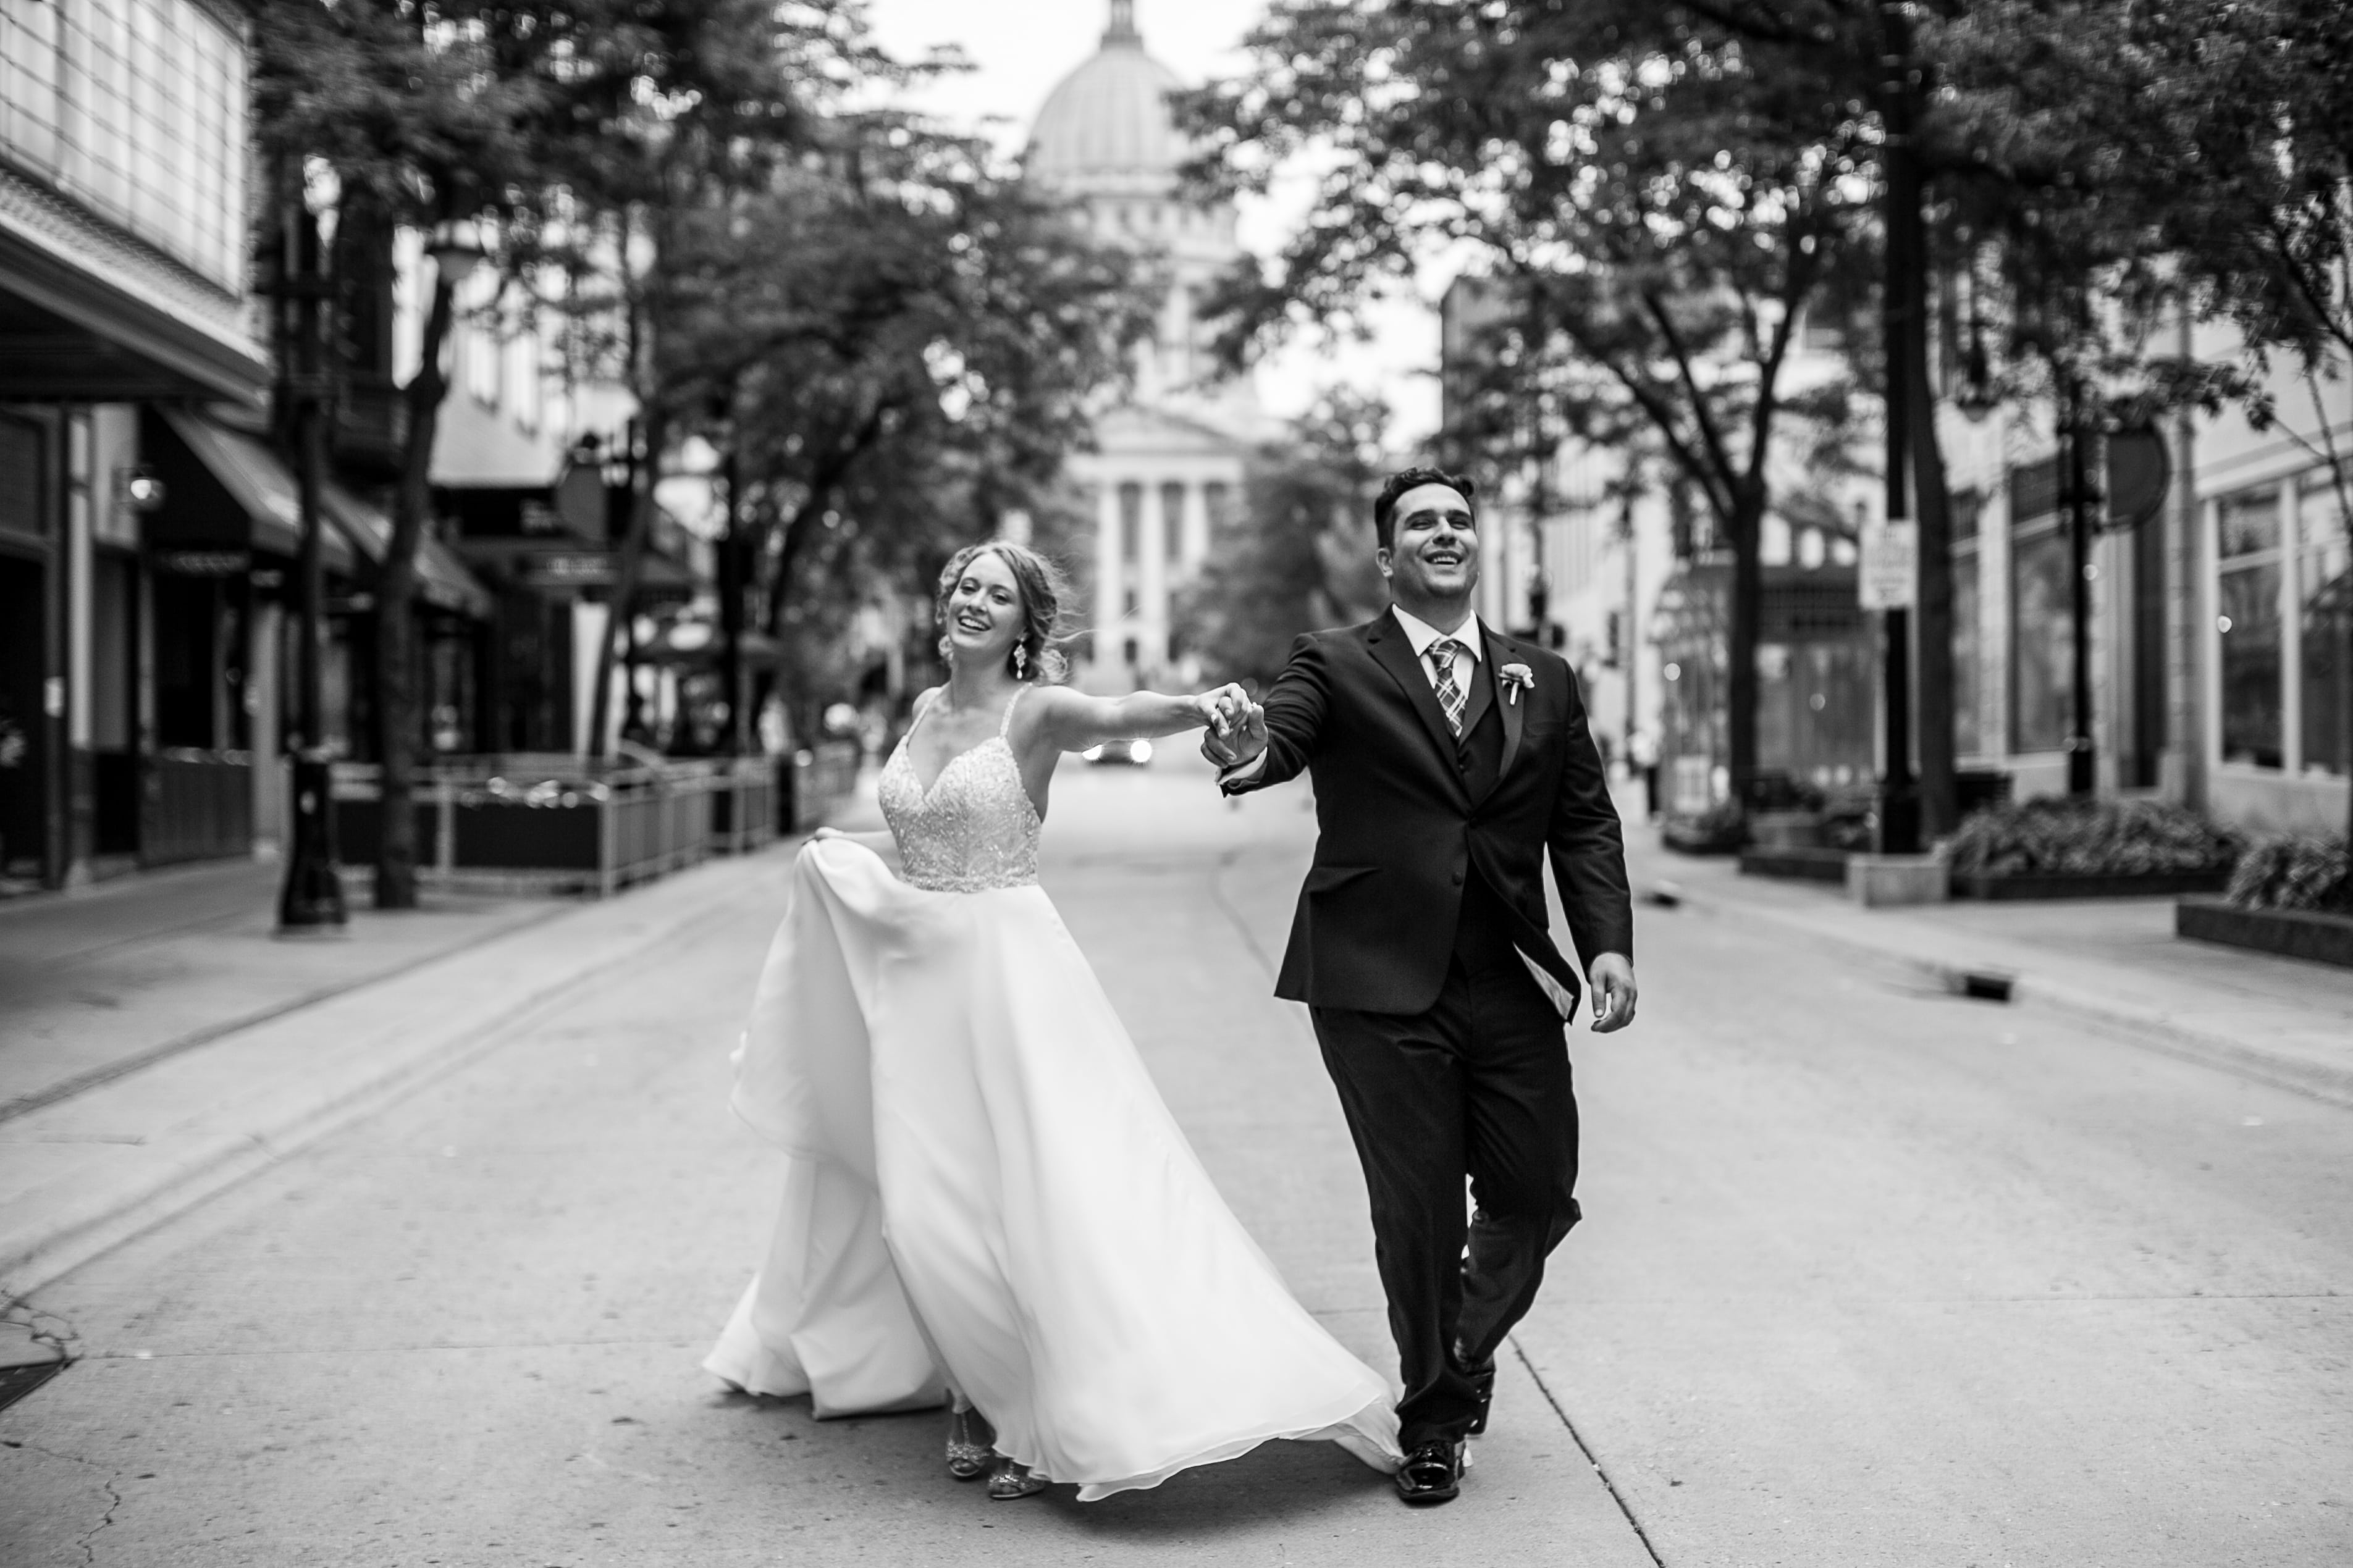 outdoor wedding state street wi state capitol madison wedding photographer wisconsin couple shots goofy fun candid  